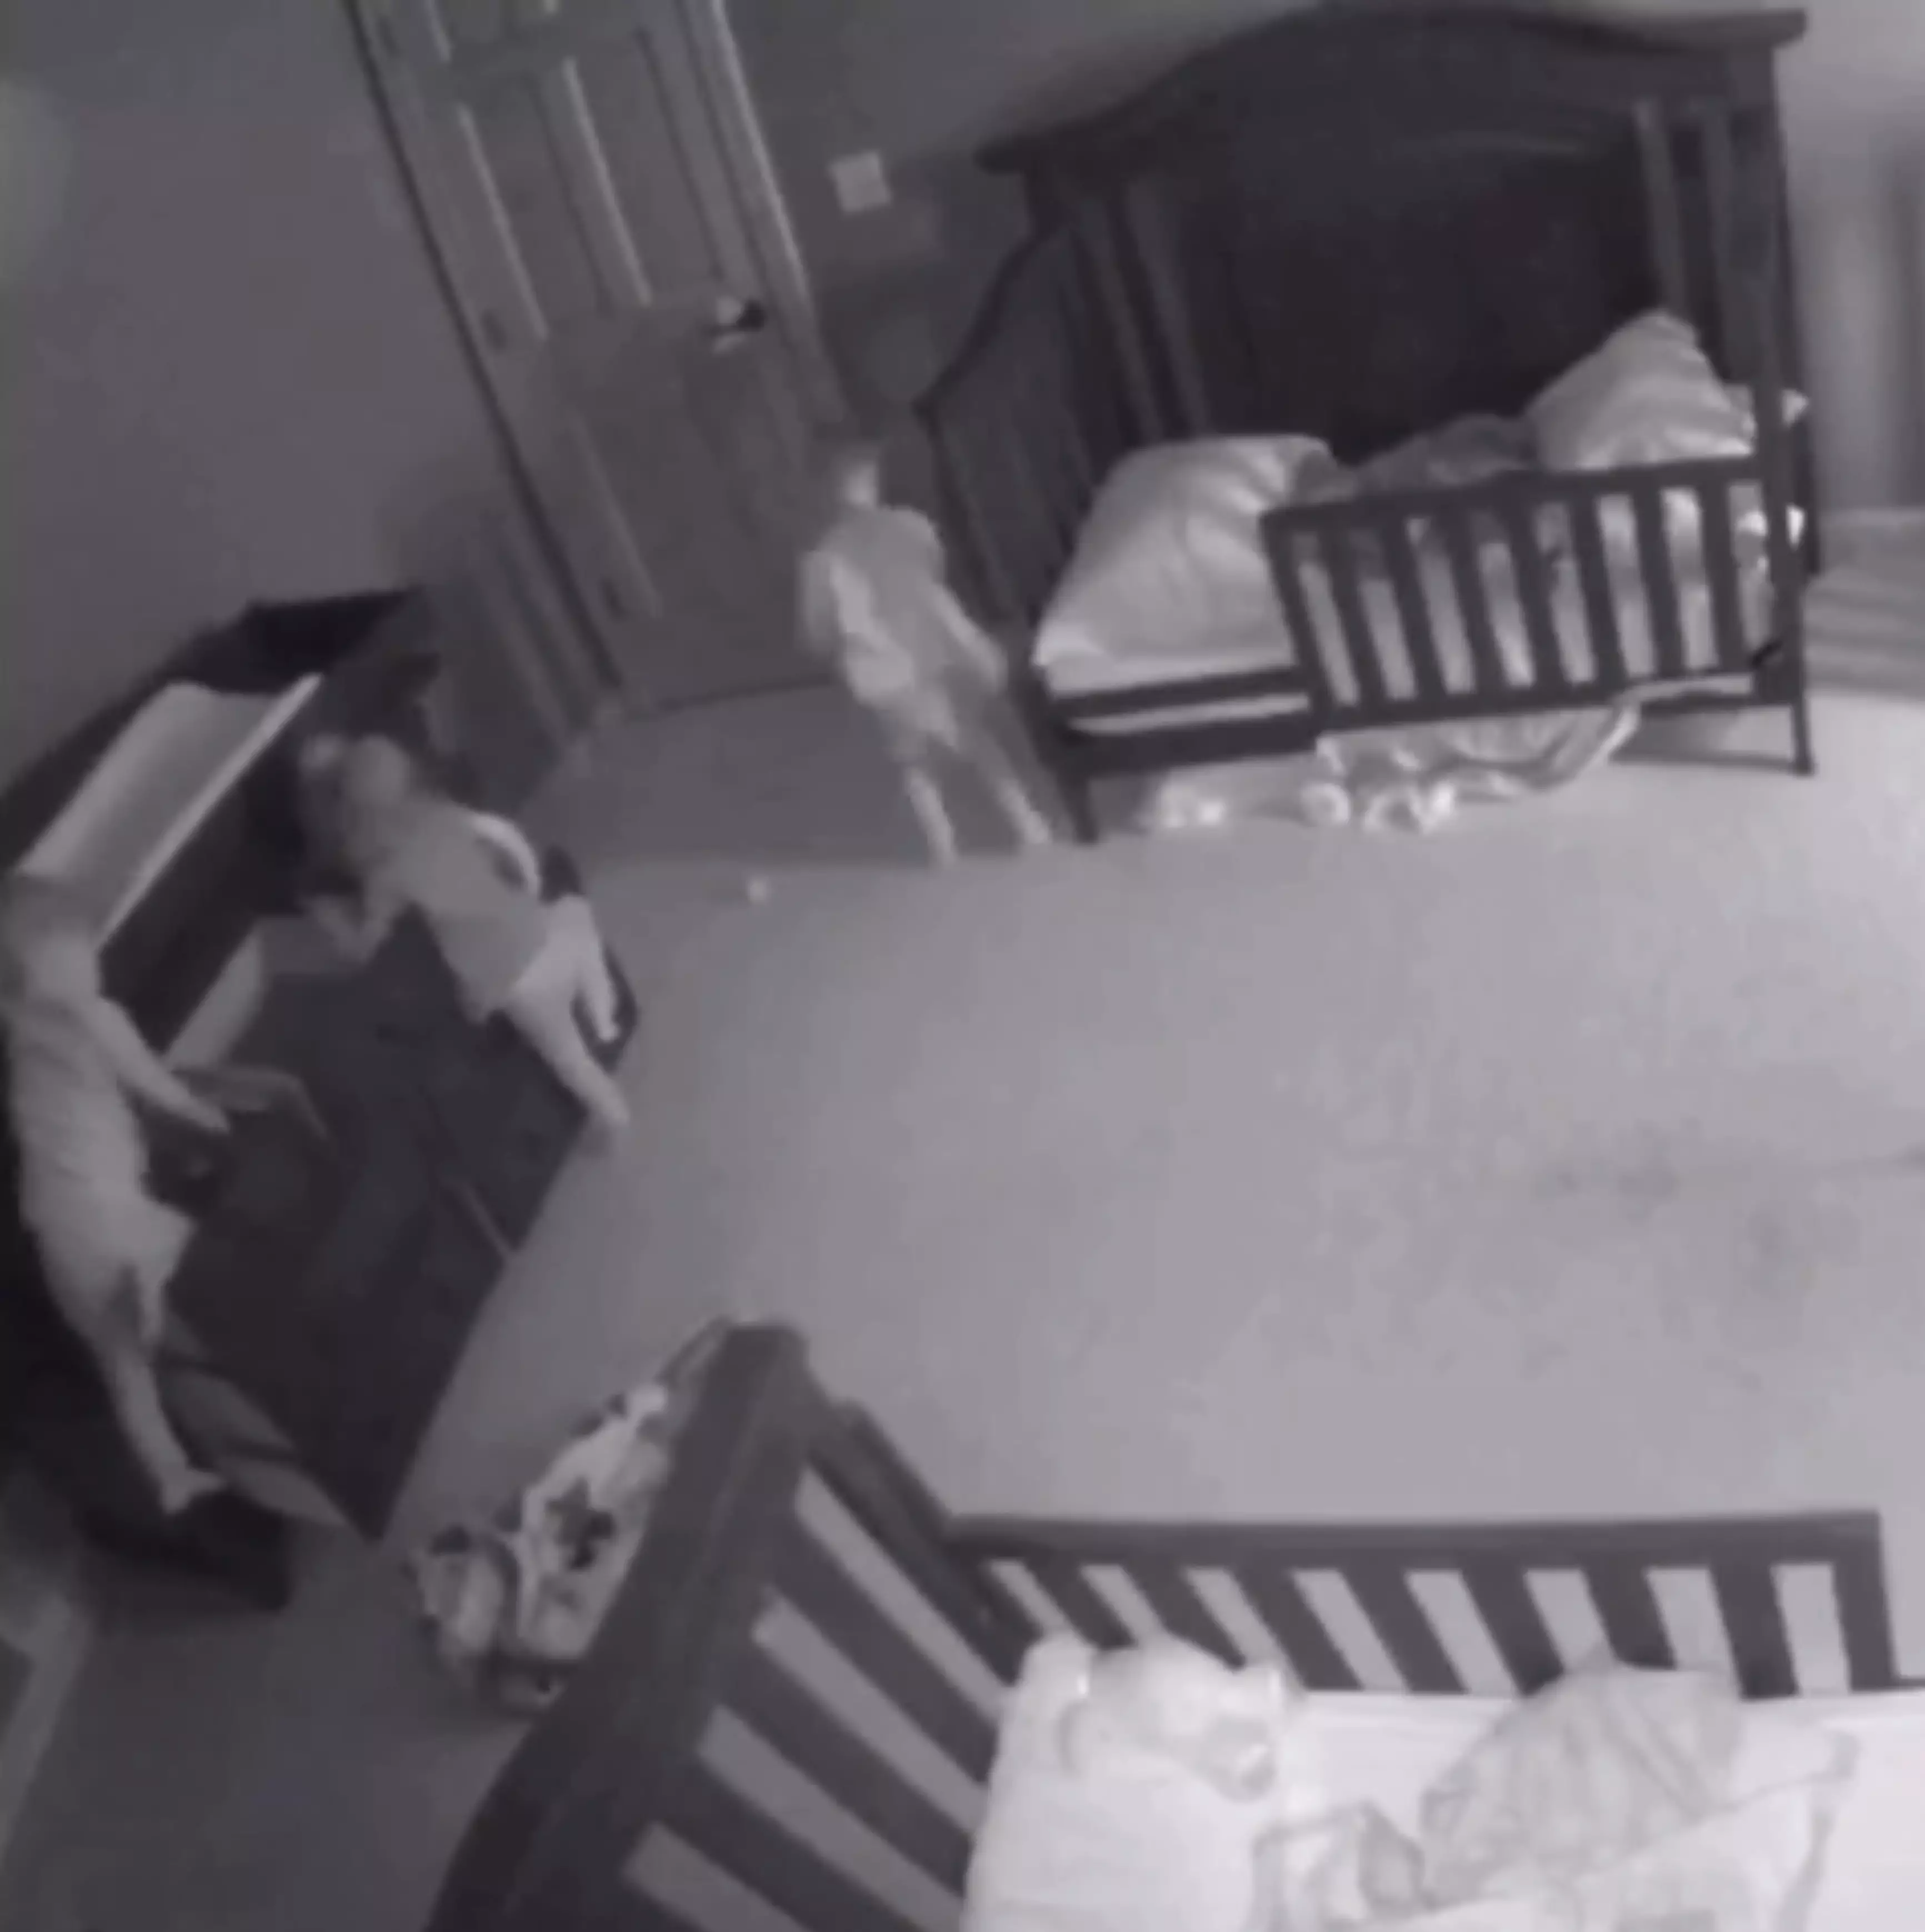 The toddler triplets began climbing the chest during their nap time (